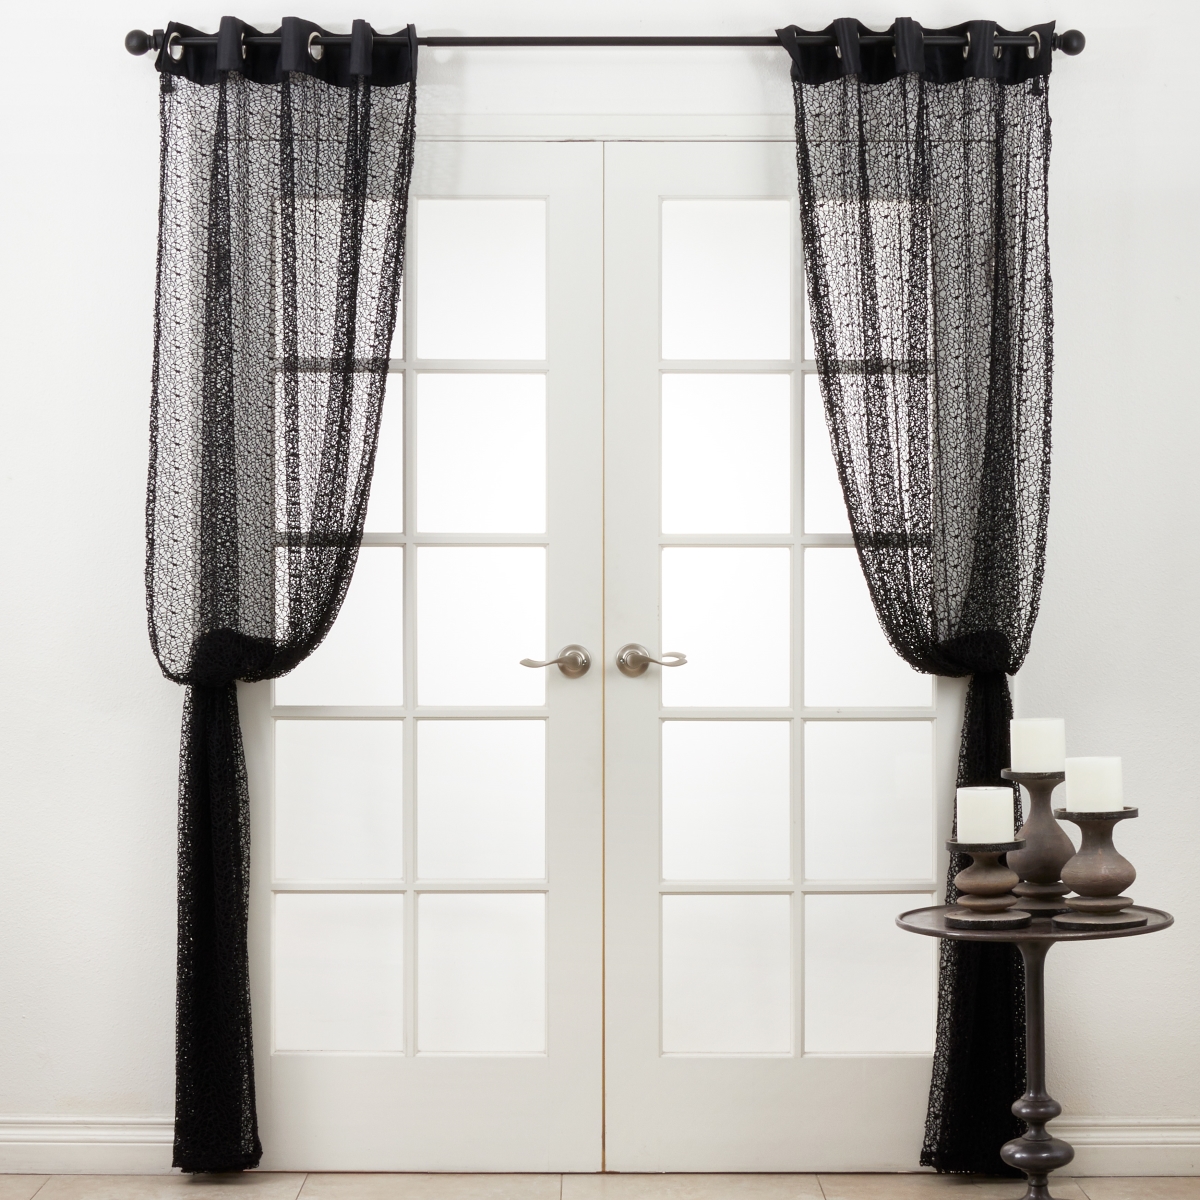 C977.bk5594 55 X 94 In. Portland Grommet Top Panel Knitted Curtains - Black